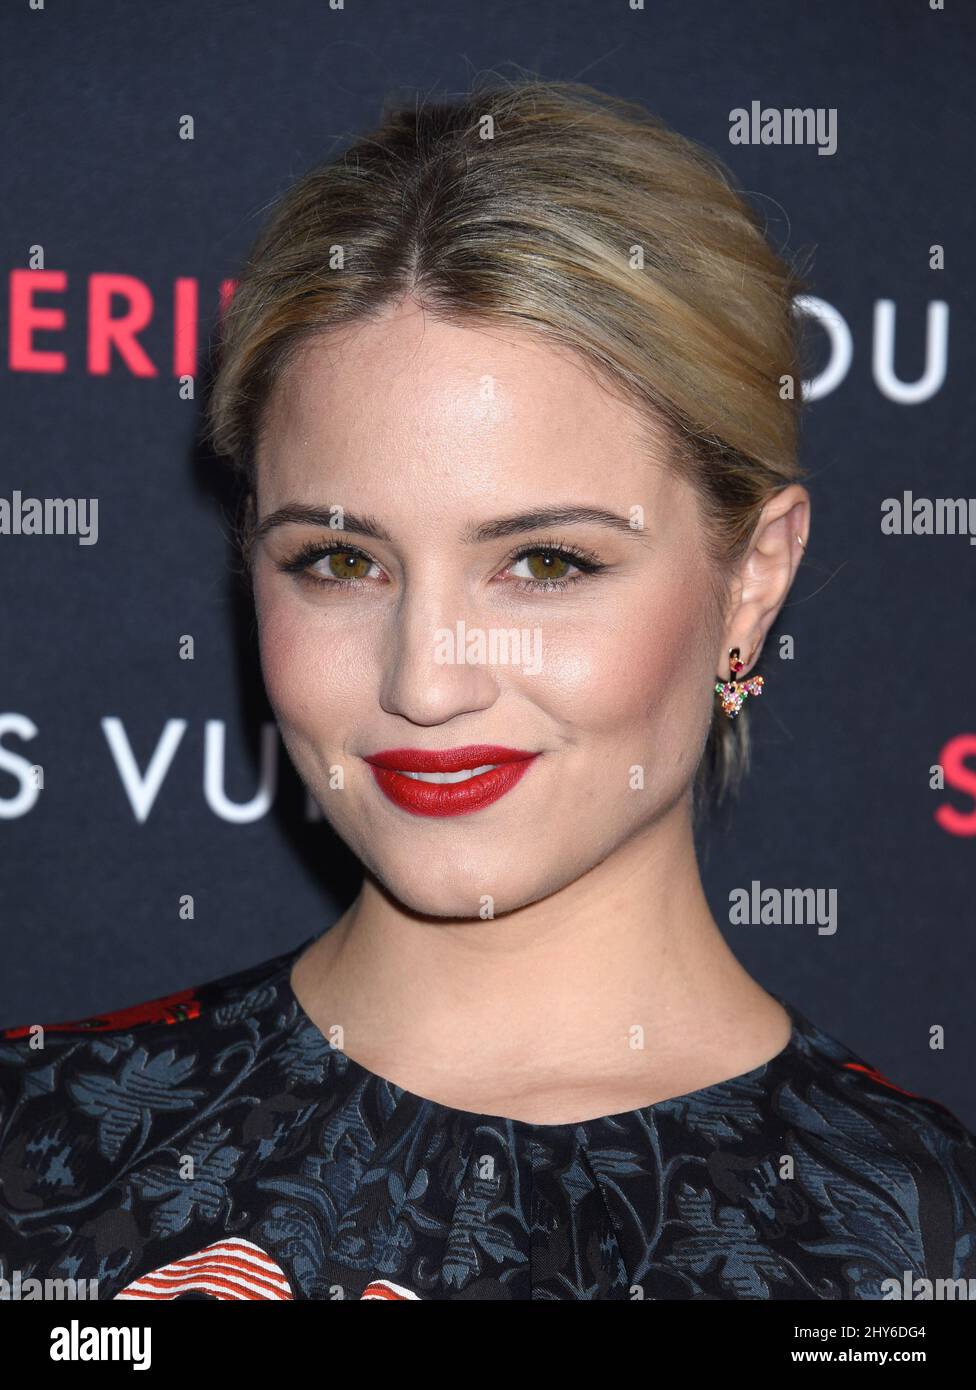 Diana Agron attends an event called, Louis Vuitton unveils an unconventional exhibition, 'SERIES 2 ??? Past, Present and Future'. This exhibition is a modern and unexpected interpretation of a fashion show. February 5, 2015 Los Angeles, Ca. Stock Photo